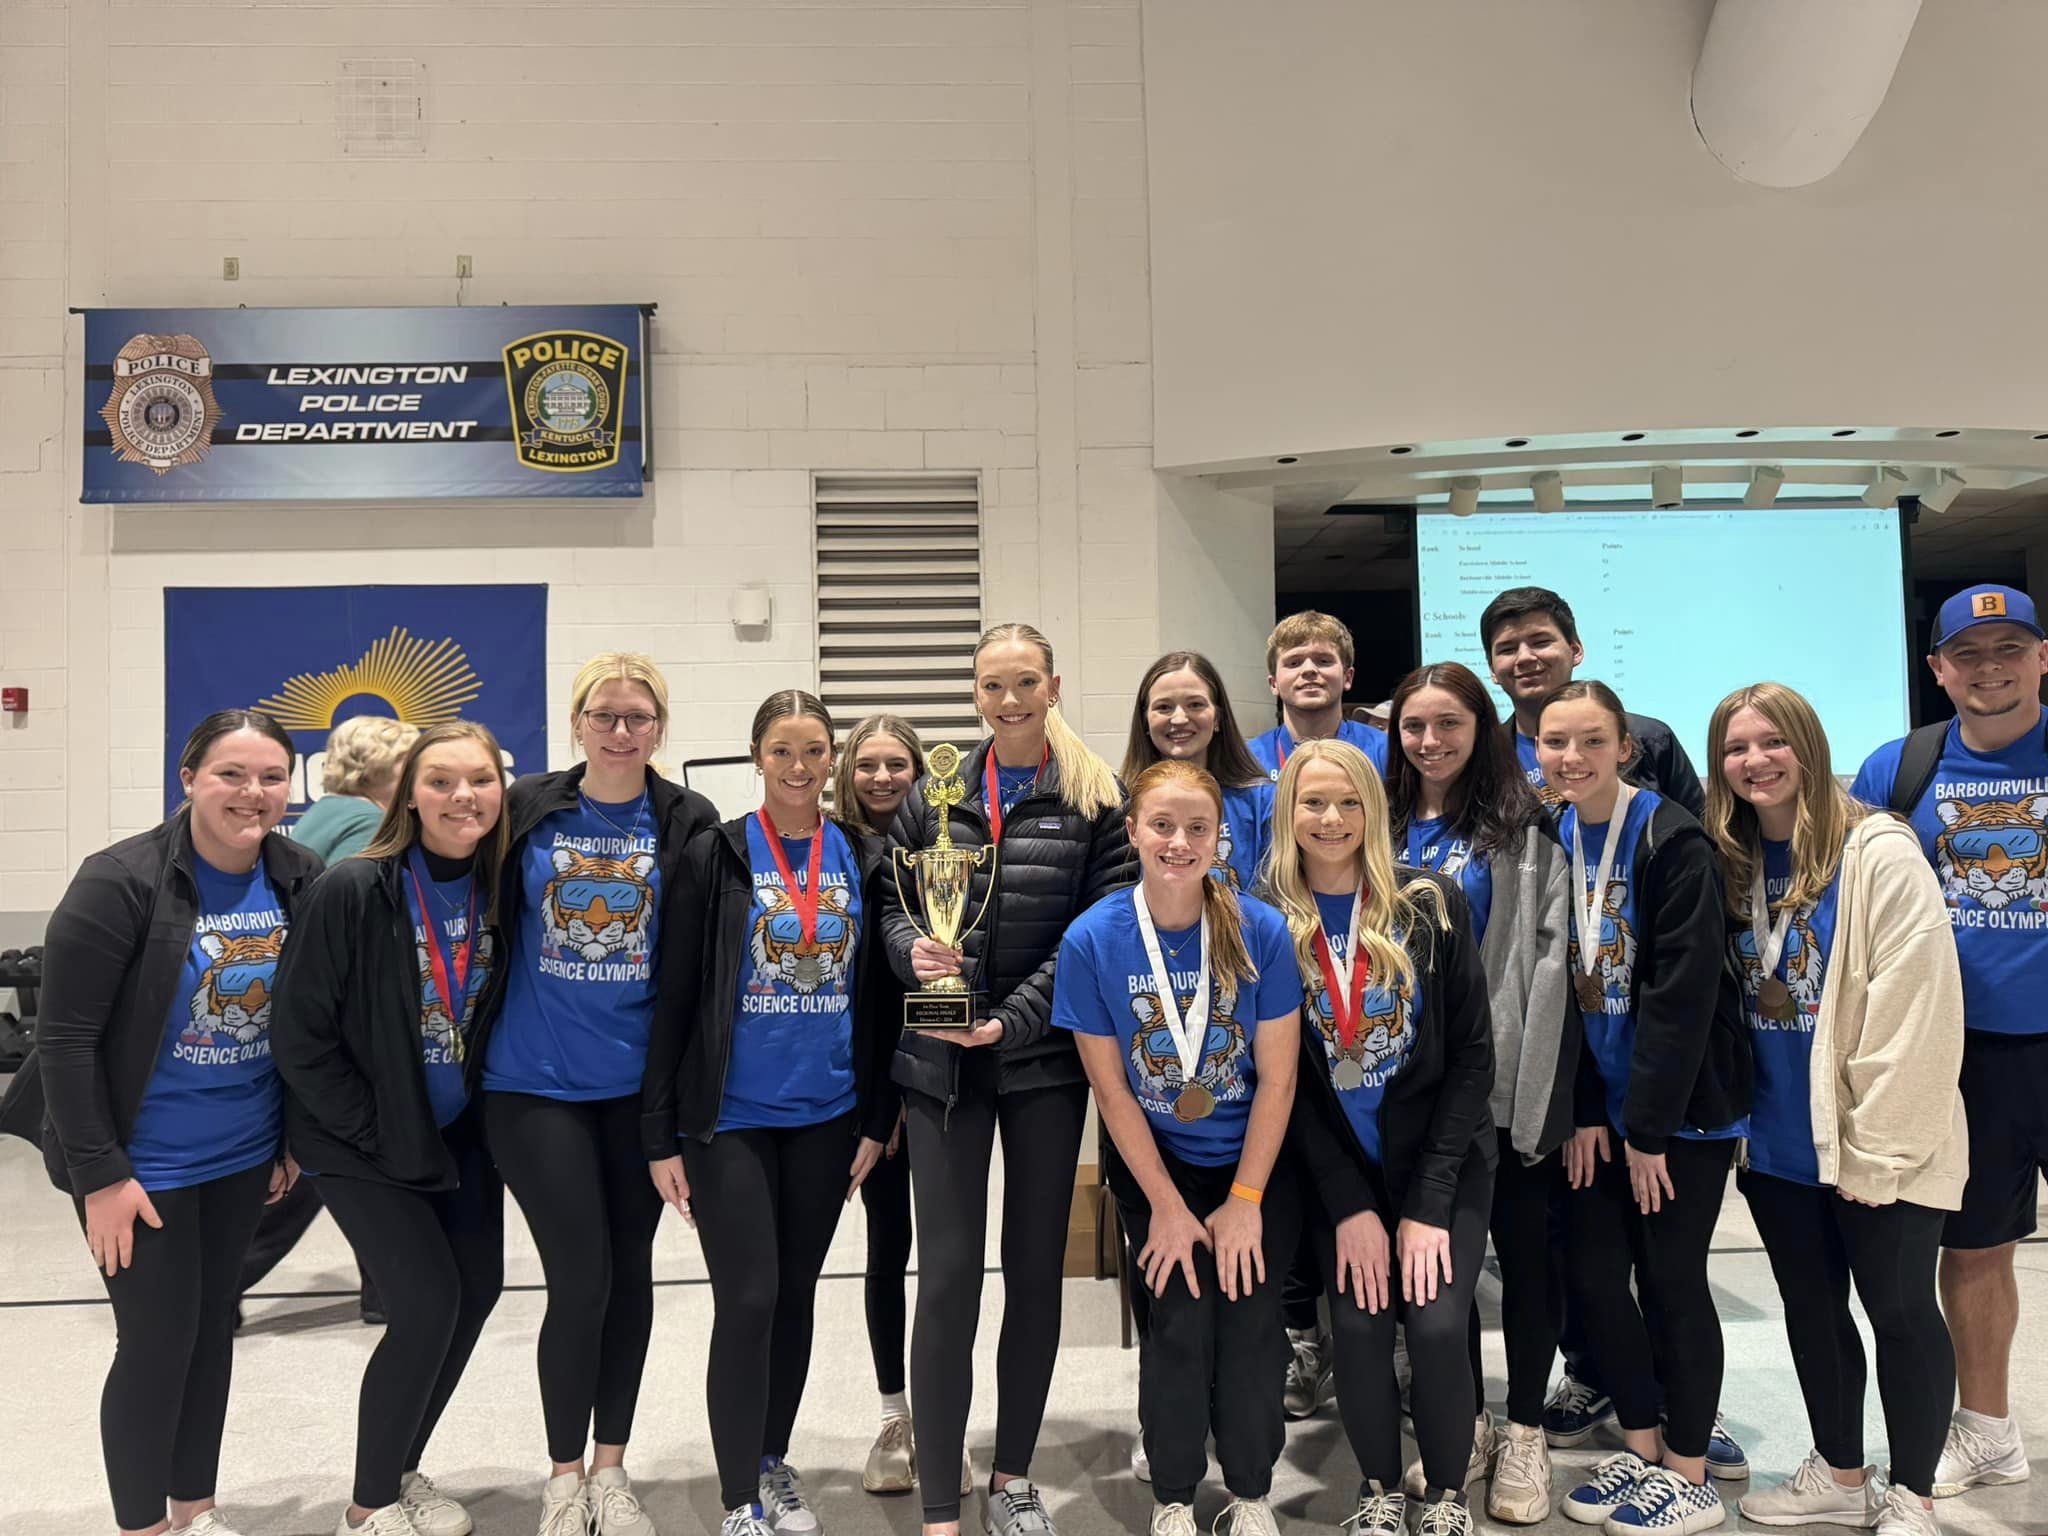 A group pf high school students wearing medals and tshirts that read "Barbourville Science Olympics"